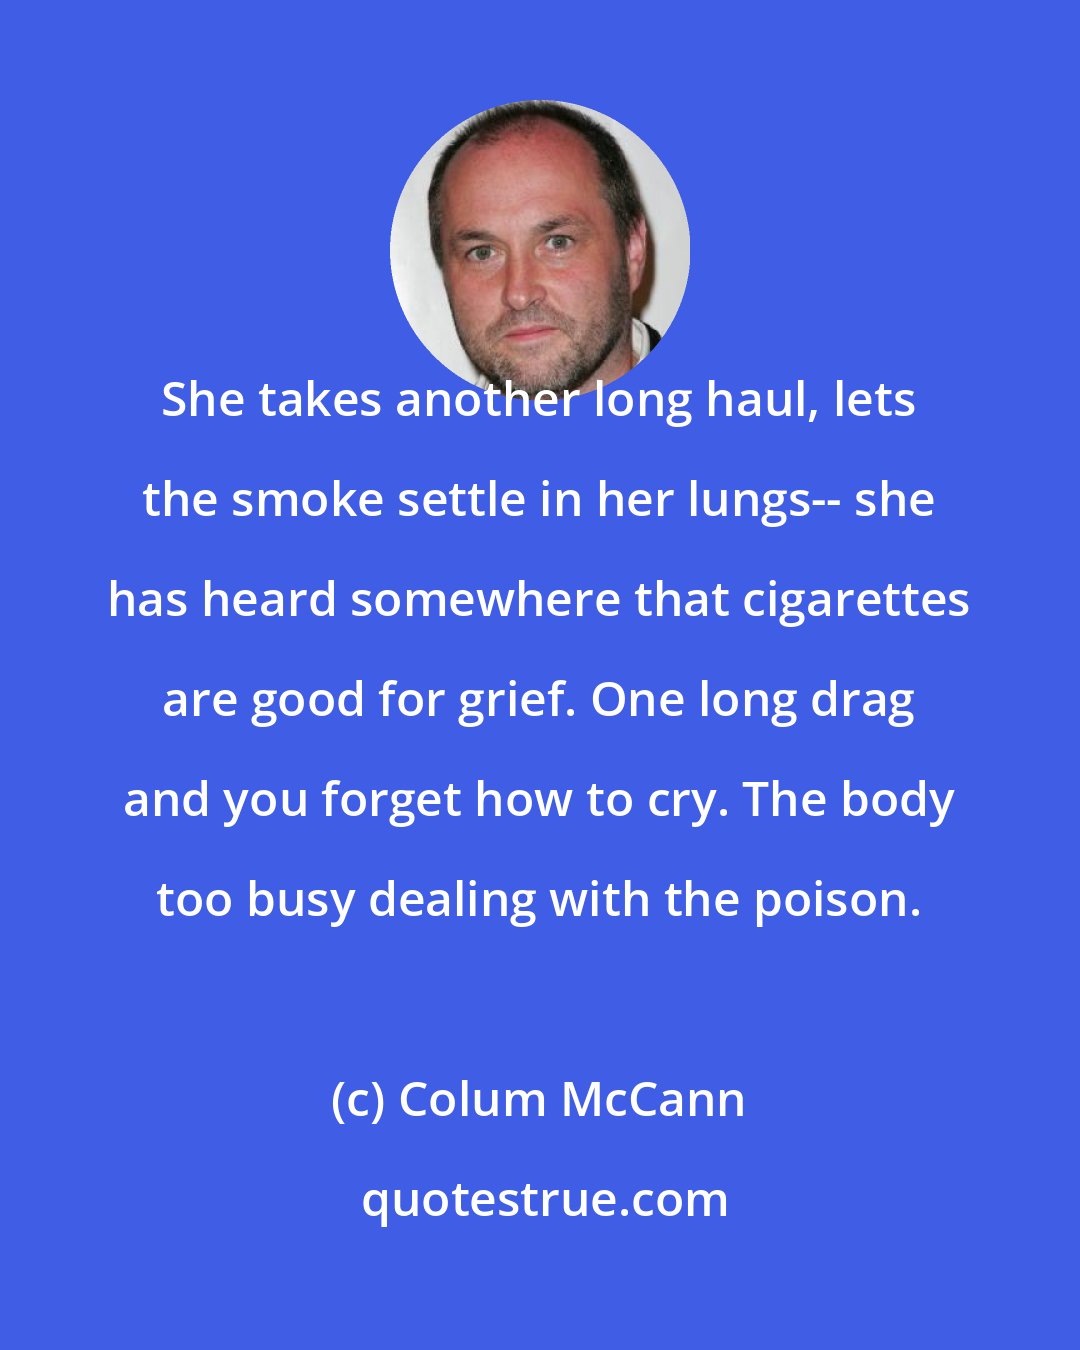 Colum McCann: She takes another long haul, lets the smoke settle in her lungs-- she has heard somewhere that cigarettes are good for grief. One long drag and you forget how to cry. The body too busy dealing with the poison.